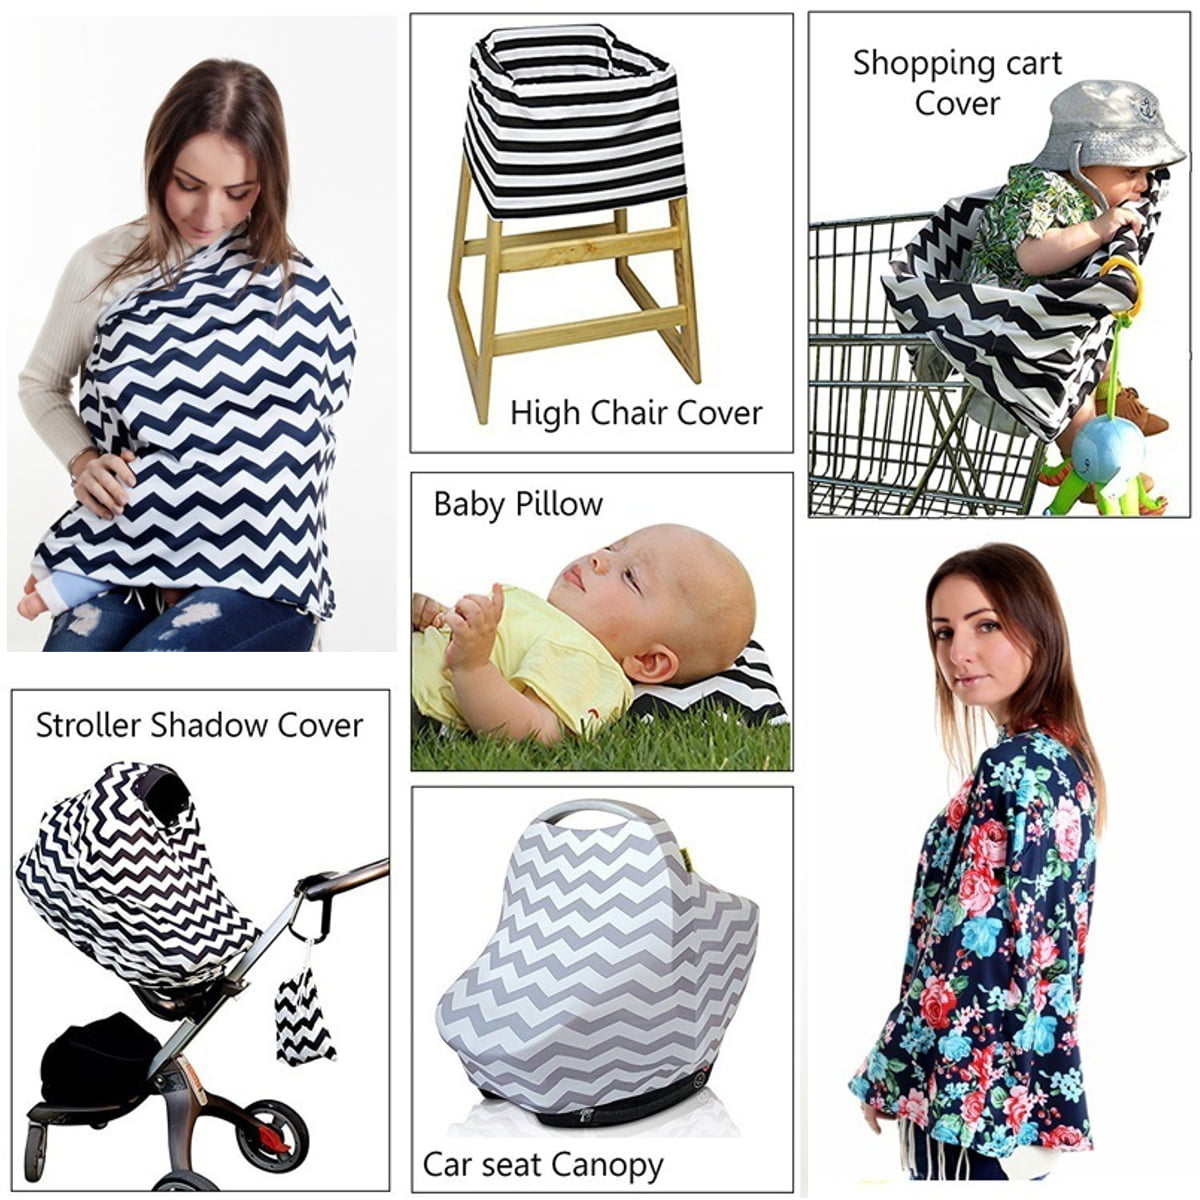 Bear Nursing Cover Carseat Canopy Super Soft Stretchy Cover Multi Use for Newborn Boys Girls Shopping Cart Cover Scarf Light Blanket Stroller Cover 